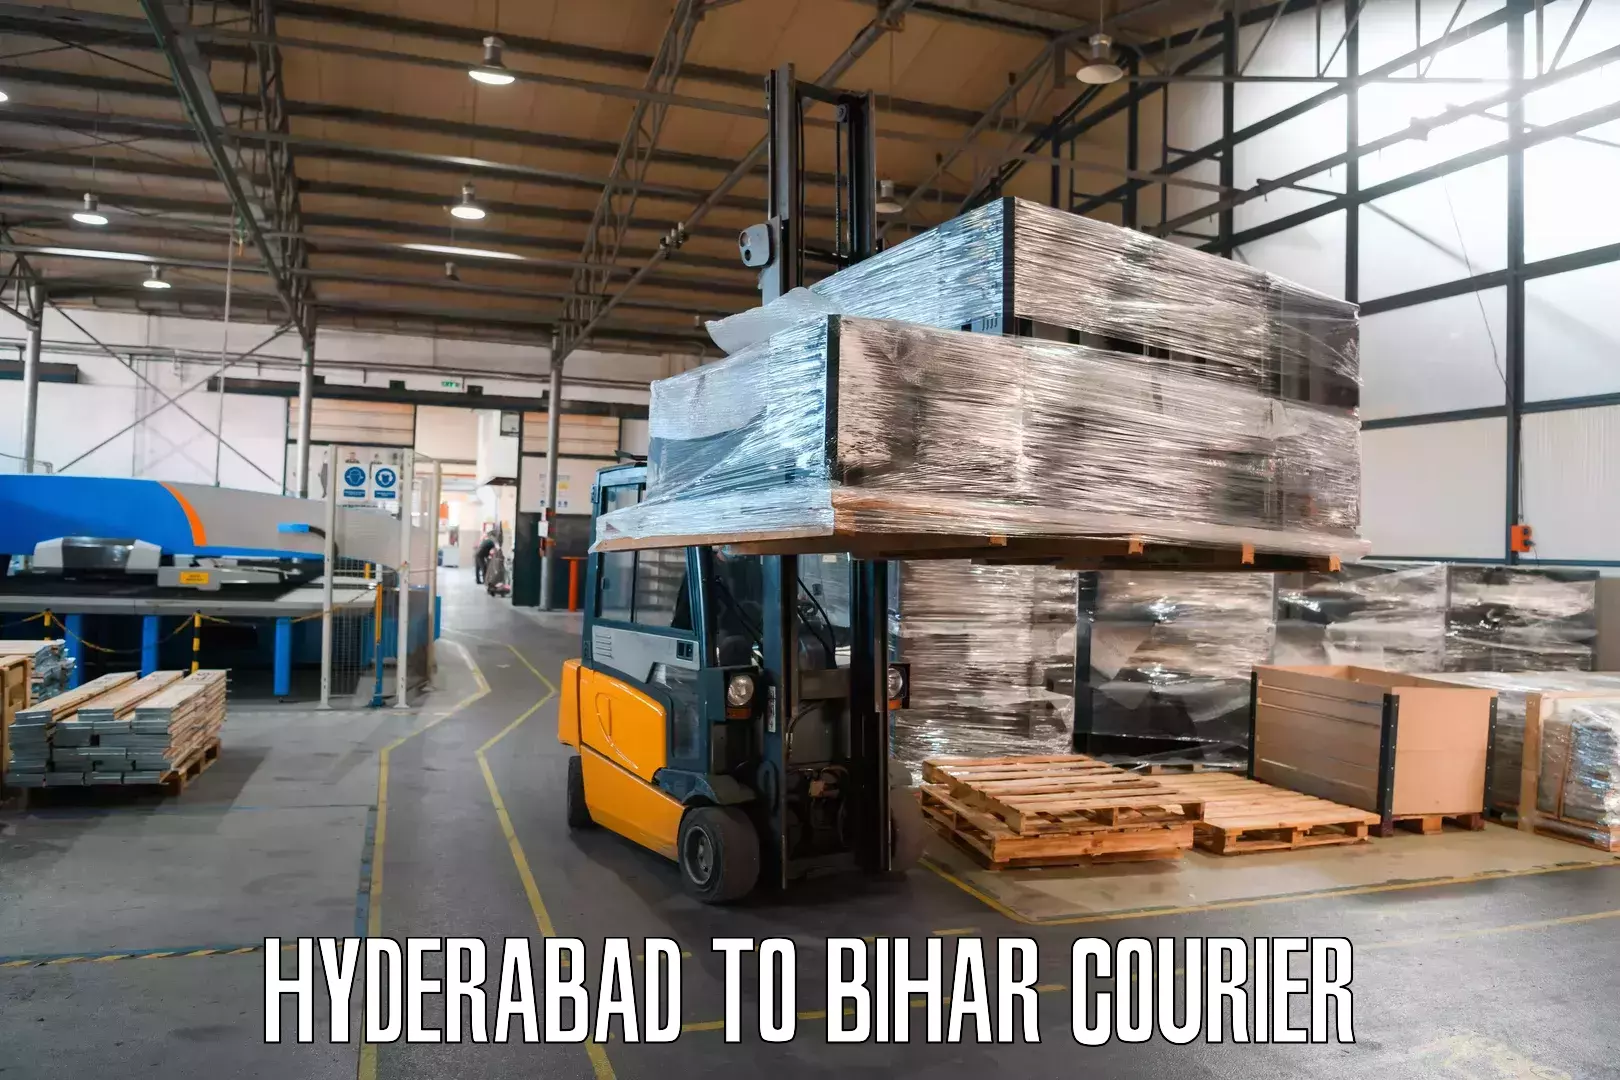 Global shipping networks Hyderabad to Piro